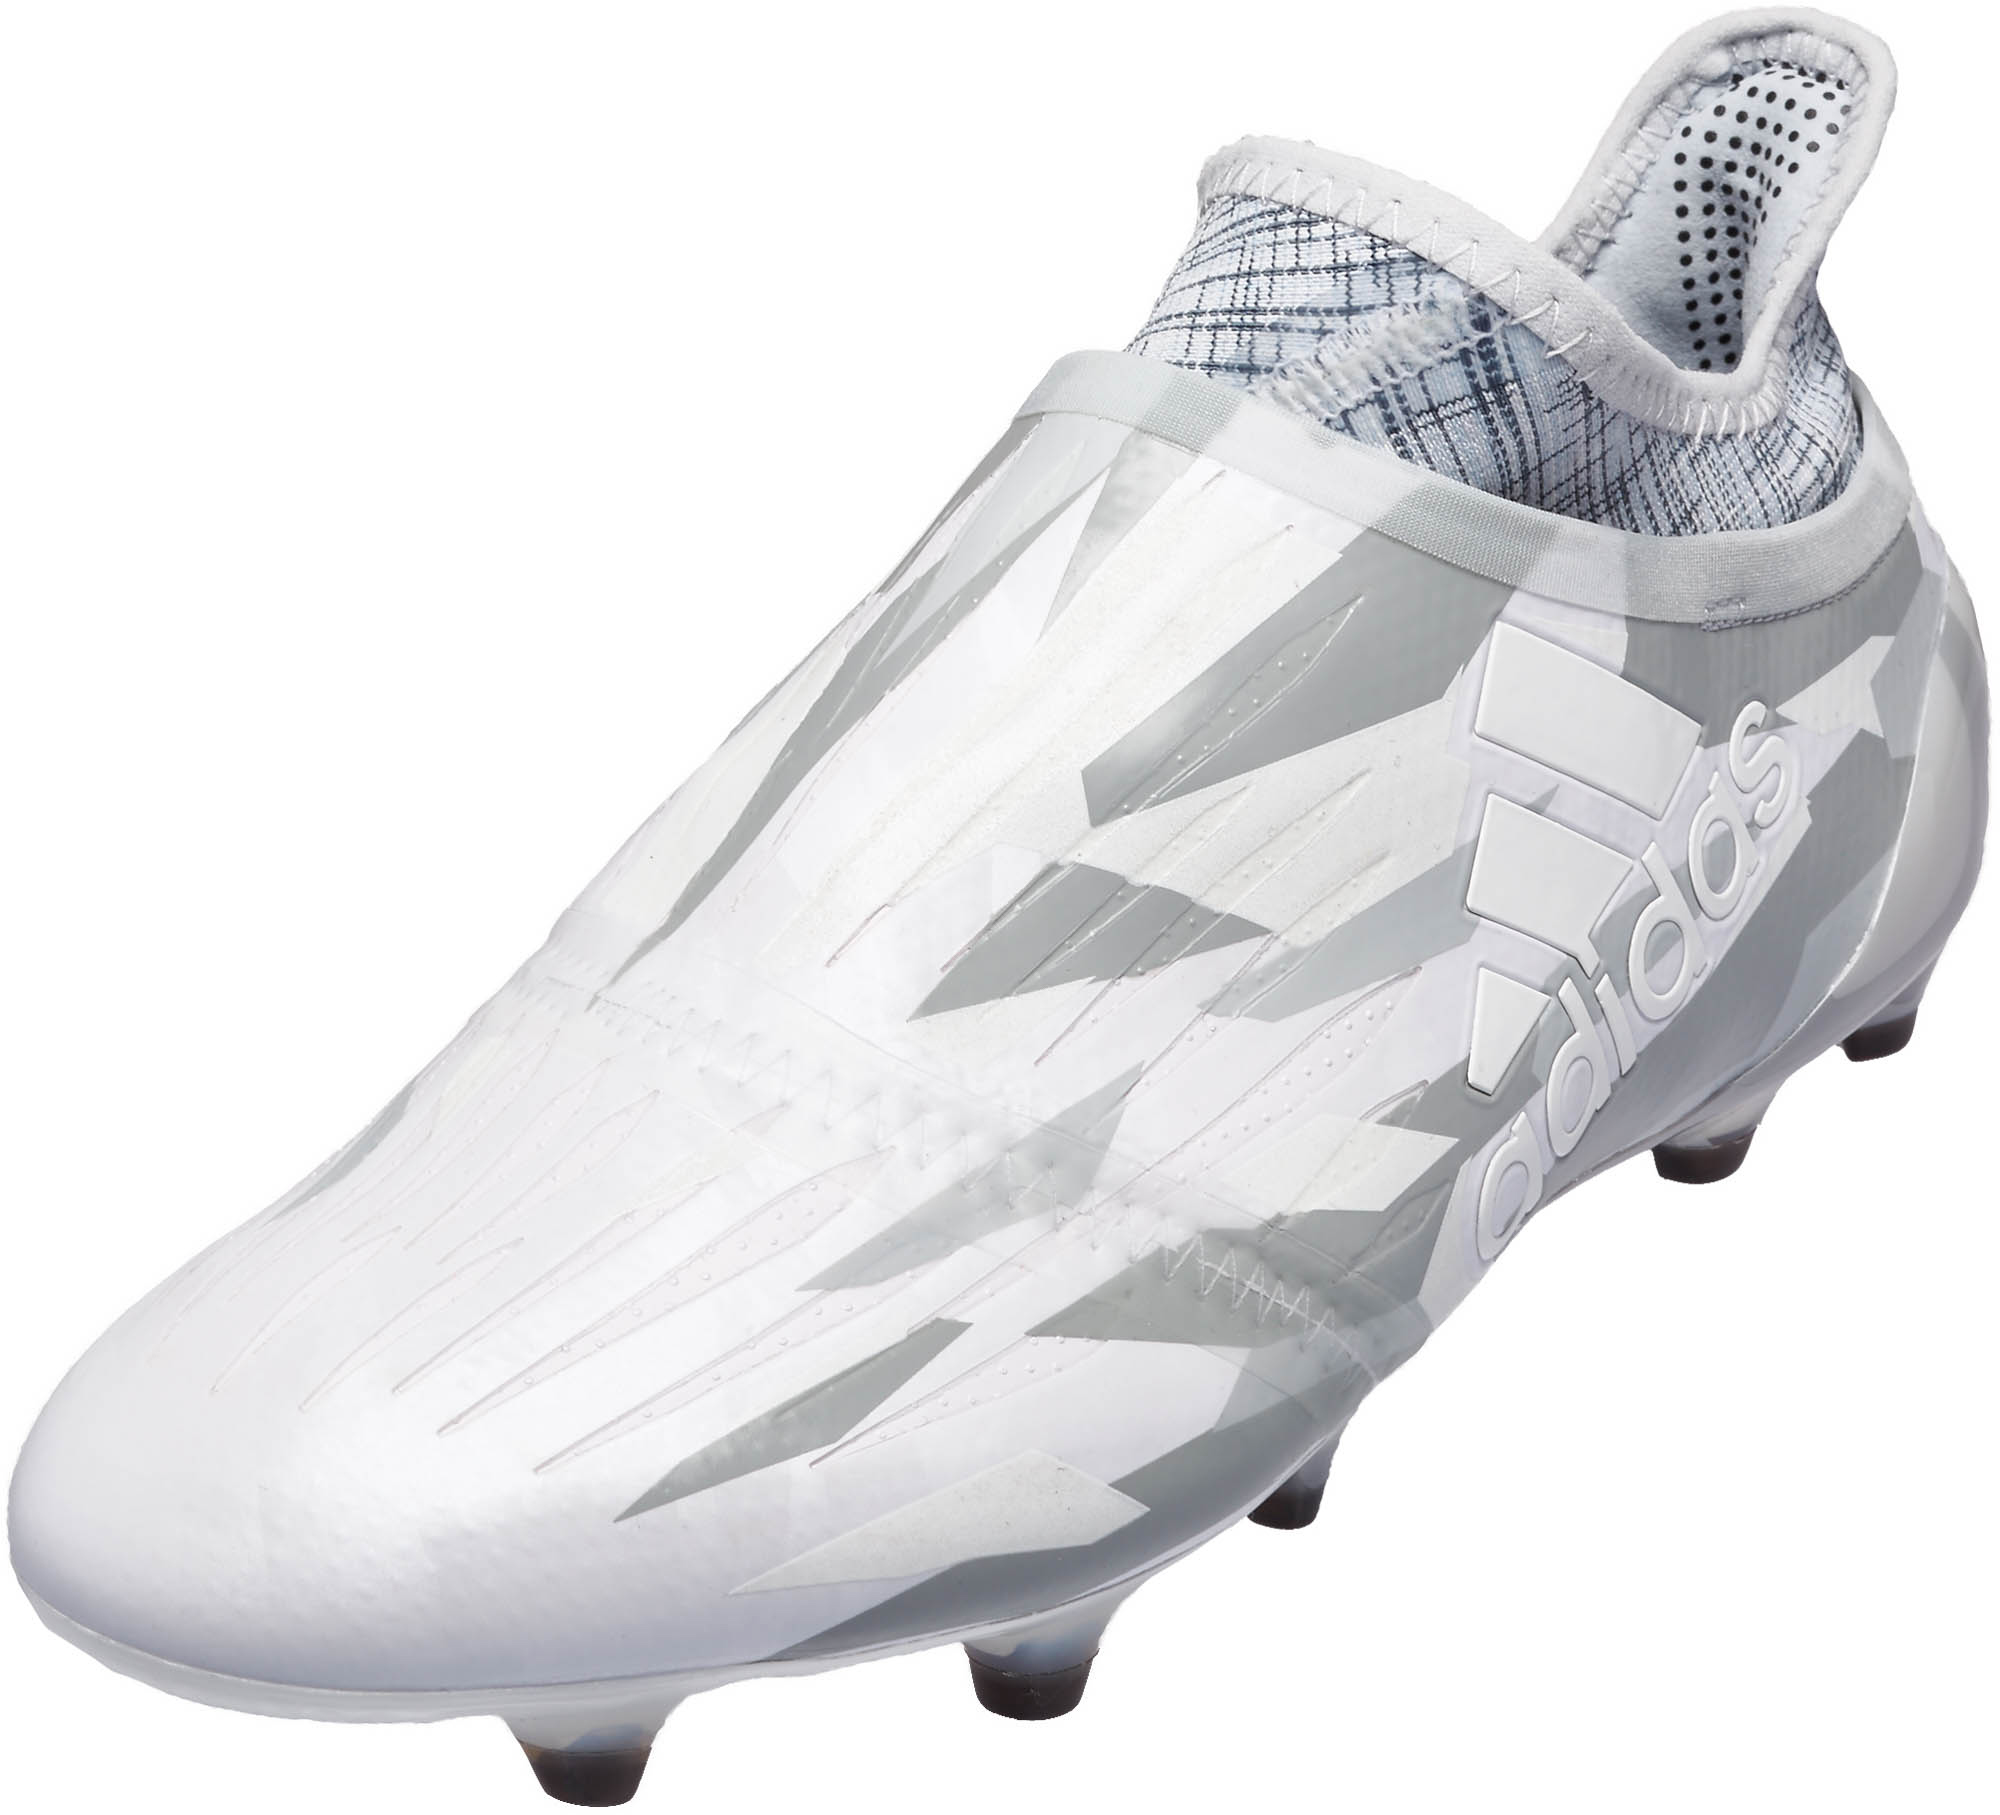 adidas x soccer cleats white